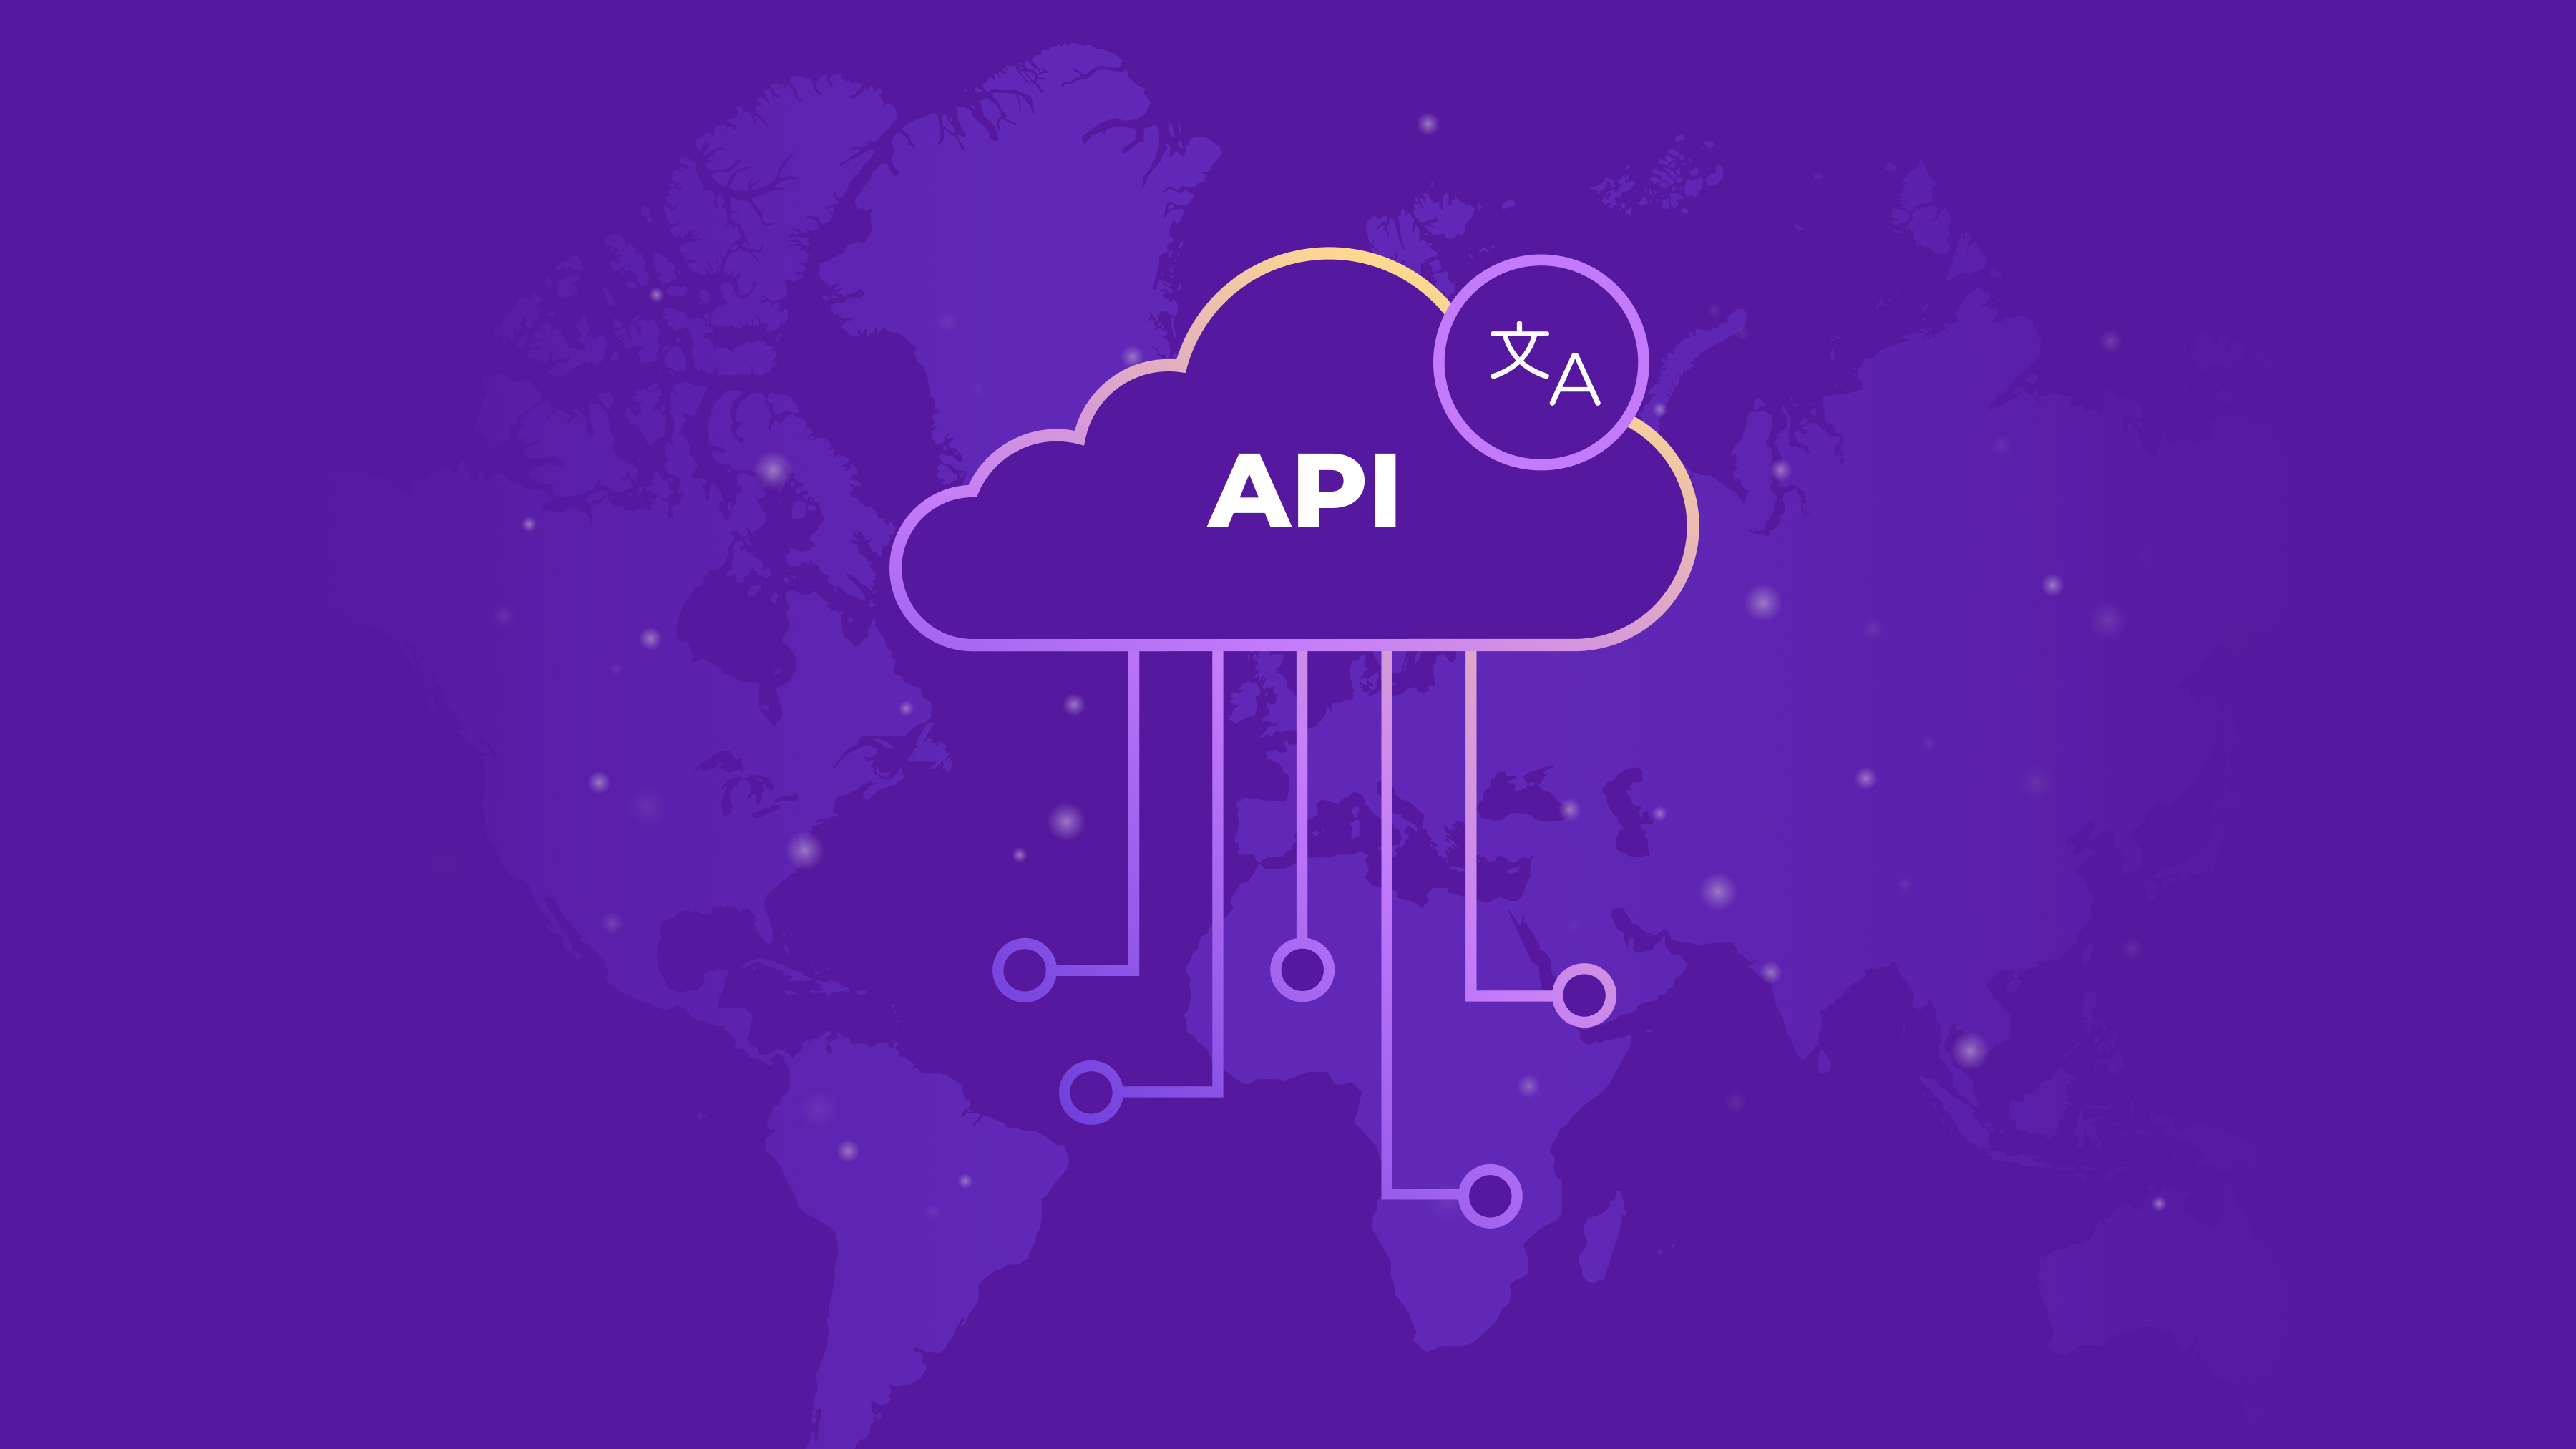 Translation APIs offer a way to integrate real-time translation into apps and systems. Learn how they work, and how to find the right API for your own needs. 